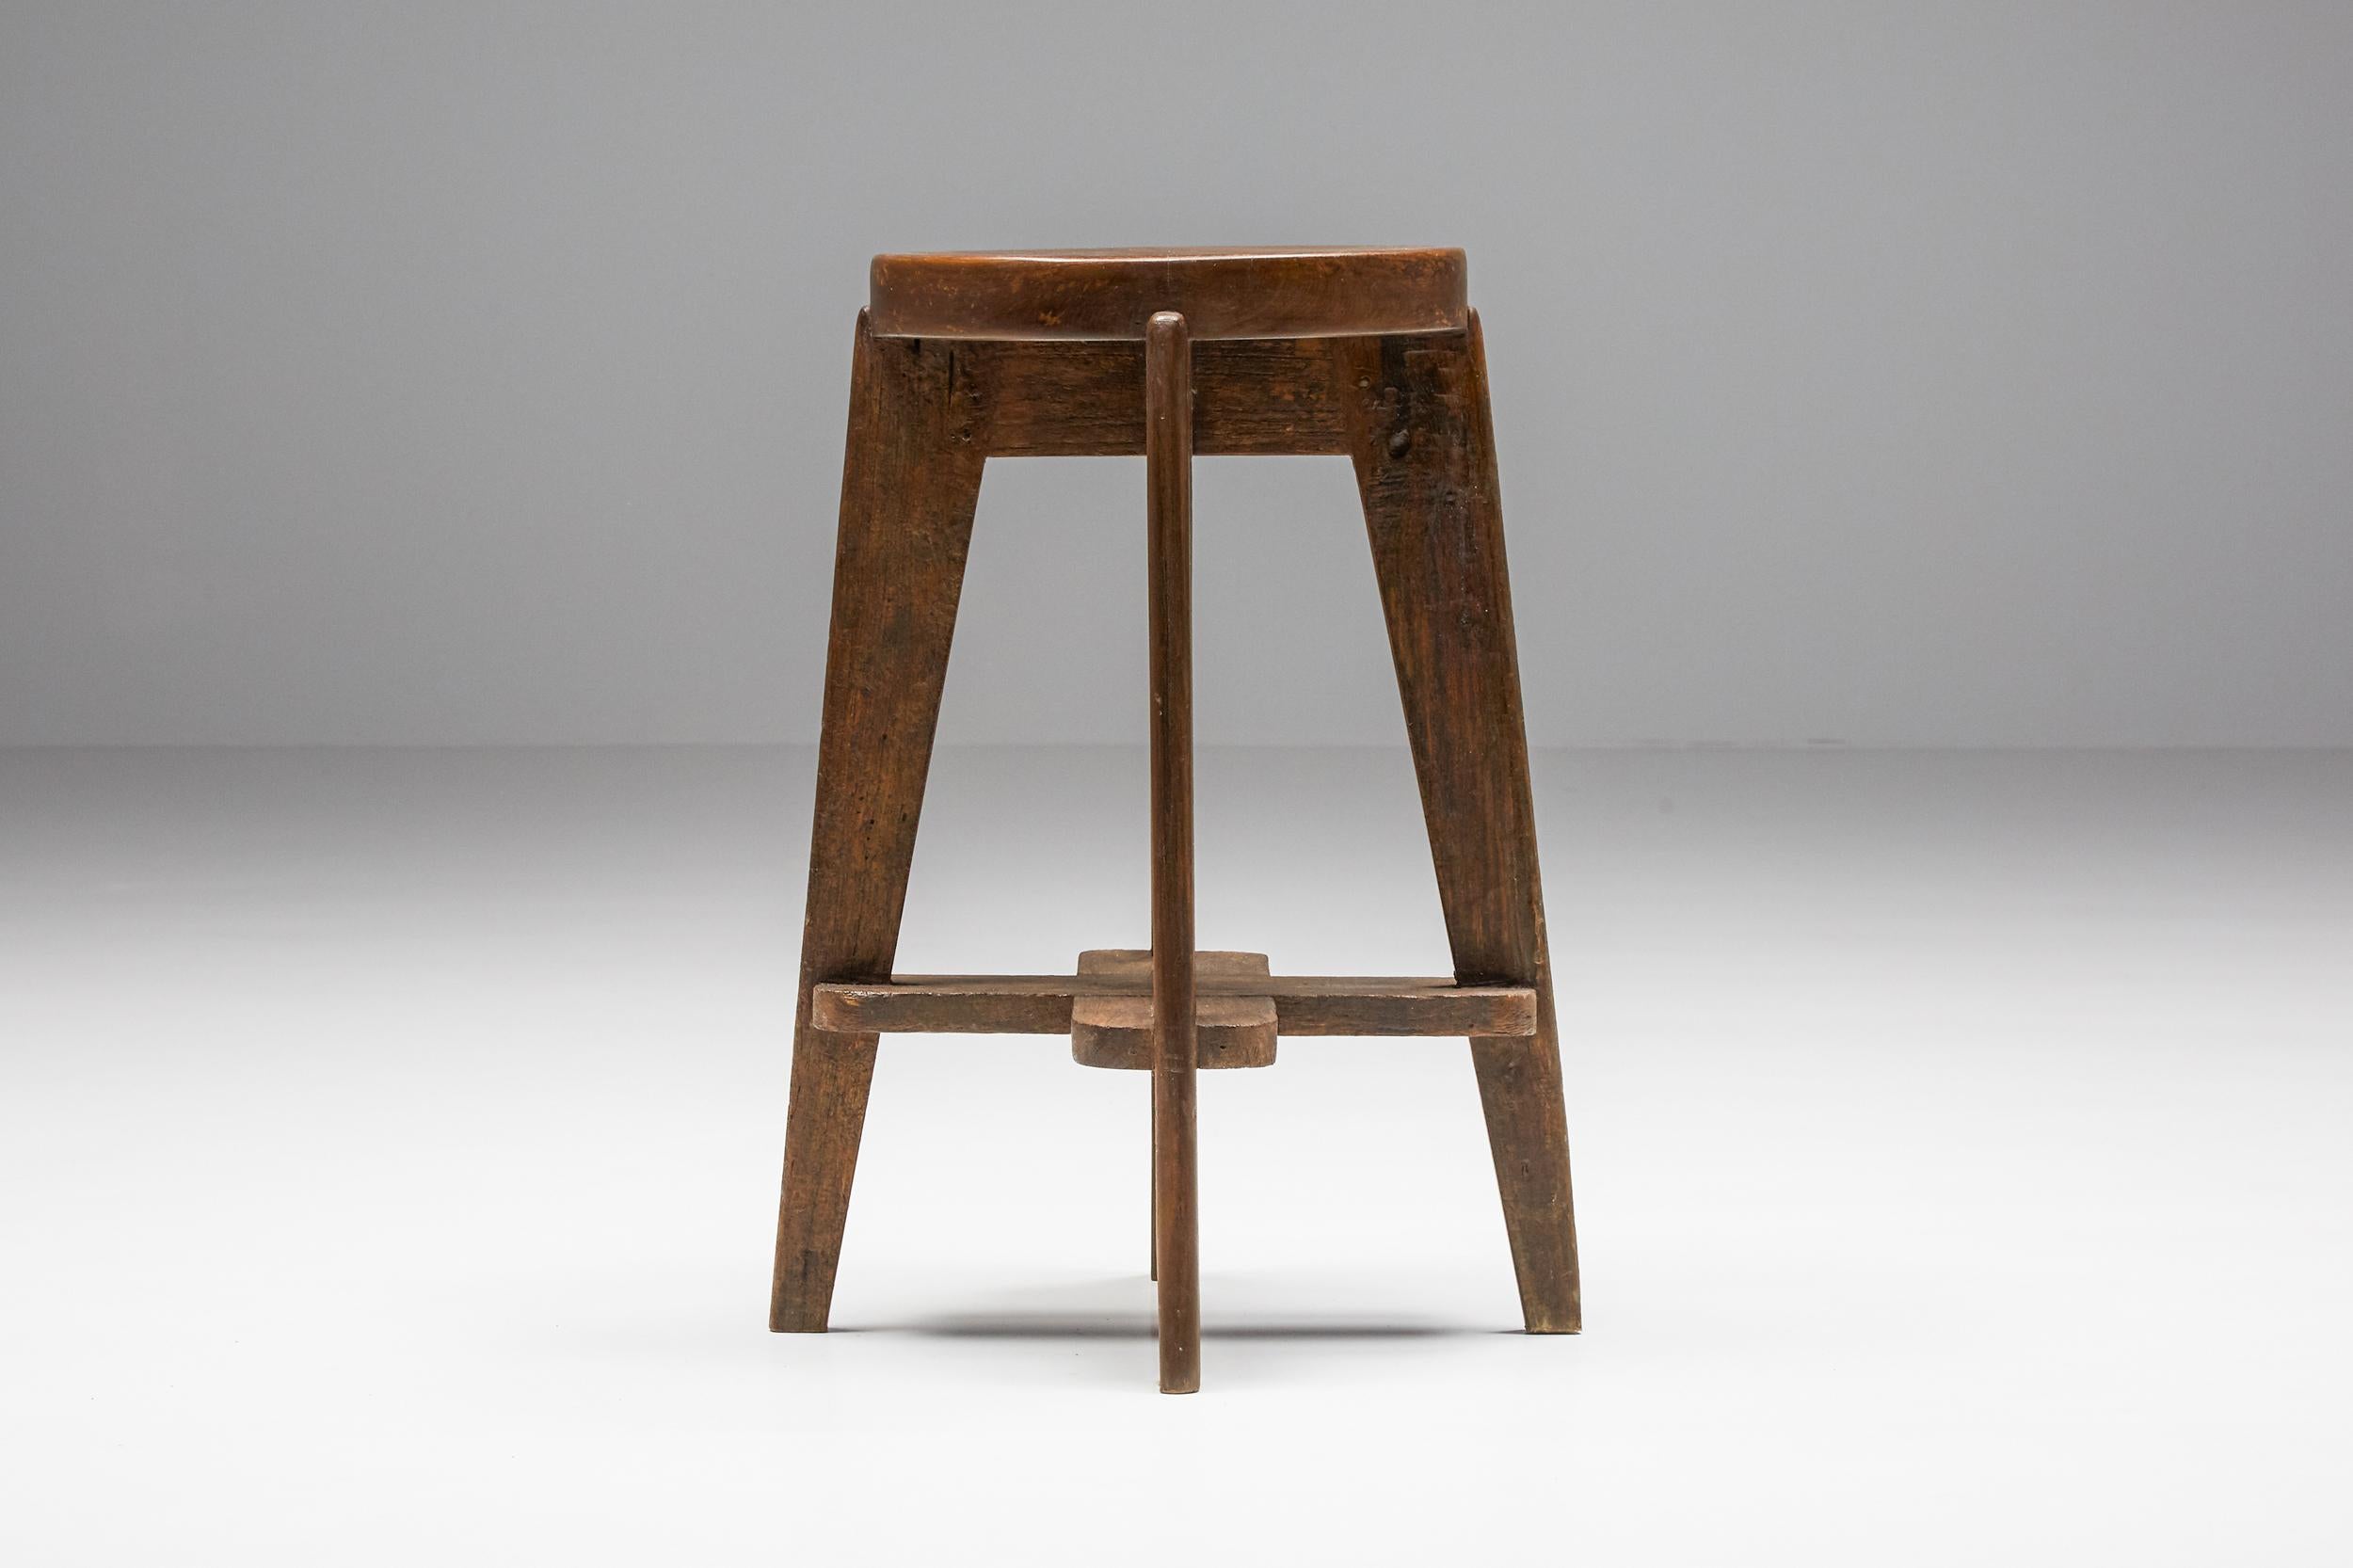 Pierre Jeanneret Chandigarh Stools 'CB', Postmodern influenced by Le Corbusier  1